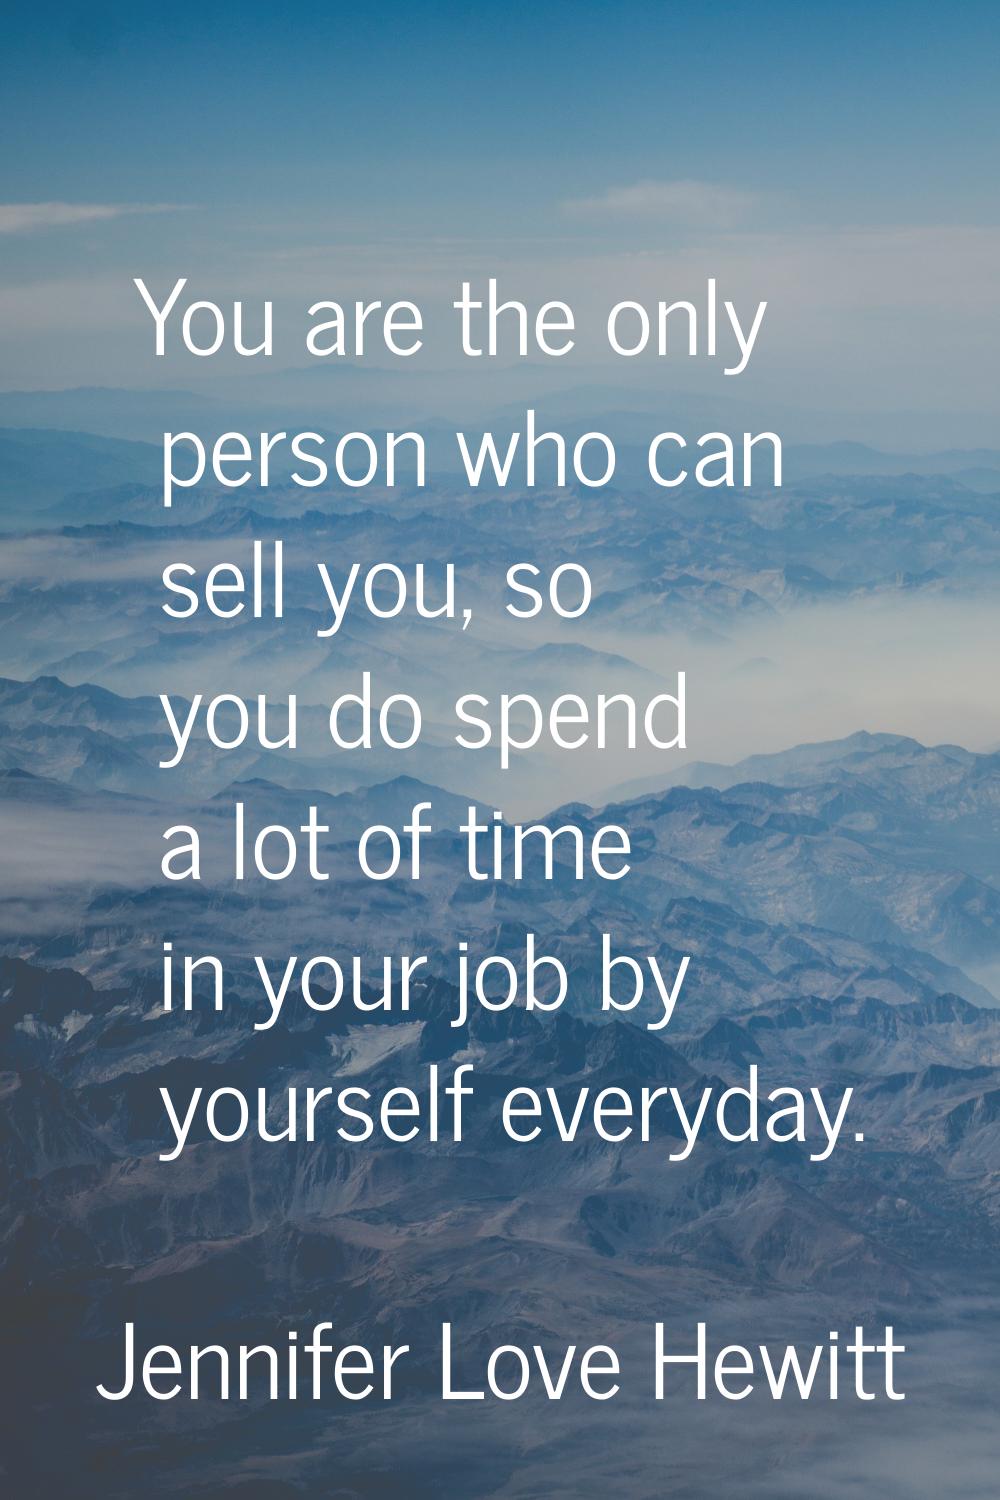 You are the only person who can sell you, so you do spend a lot of time in your job by yourself eve